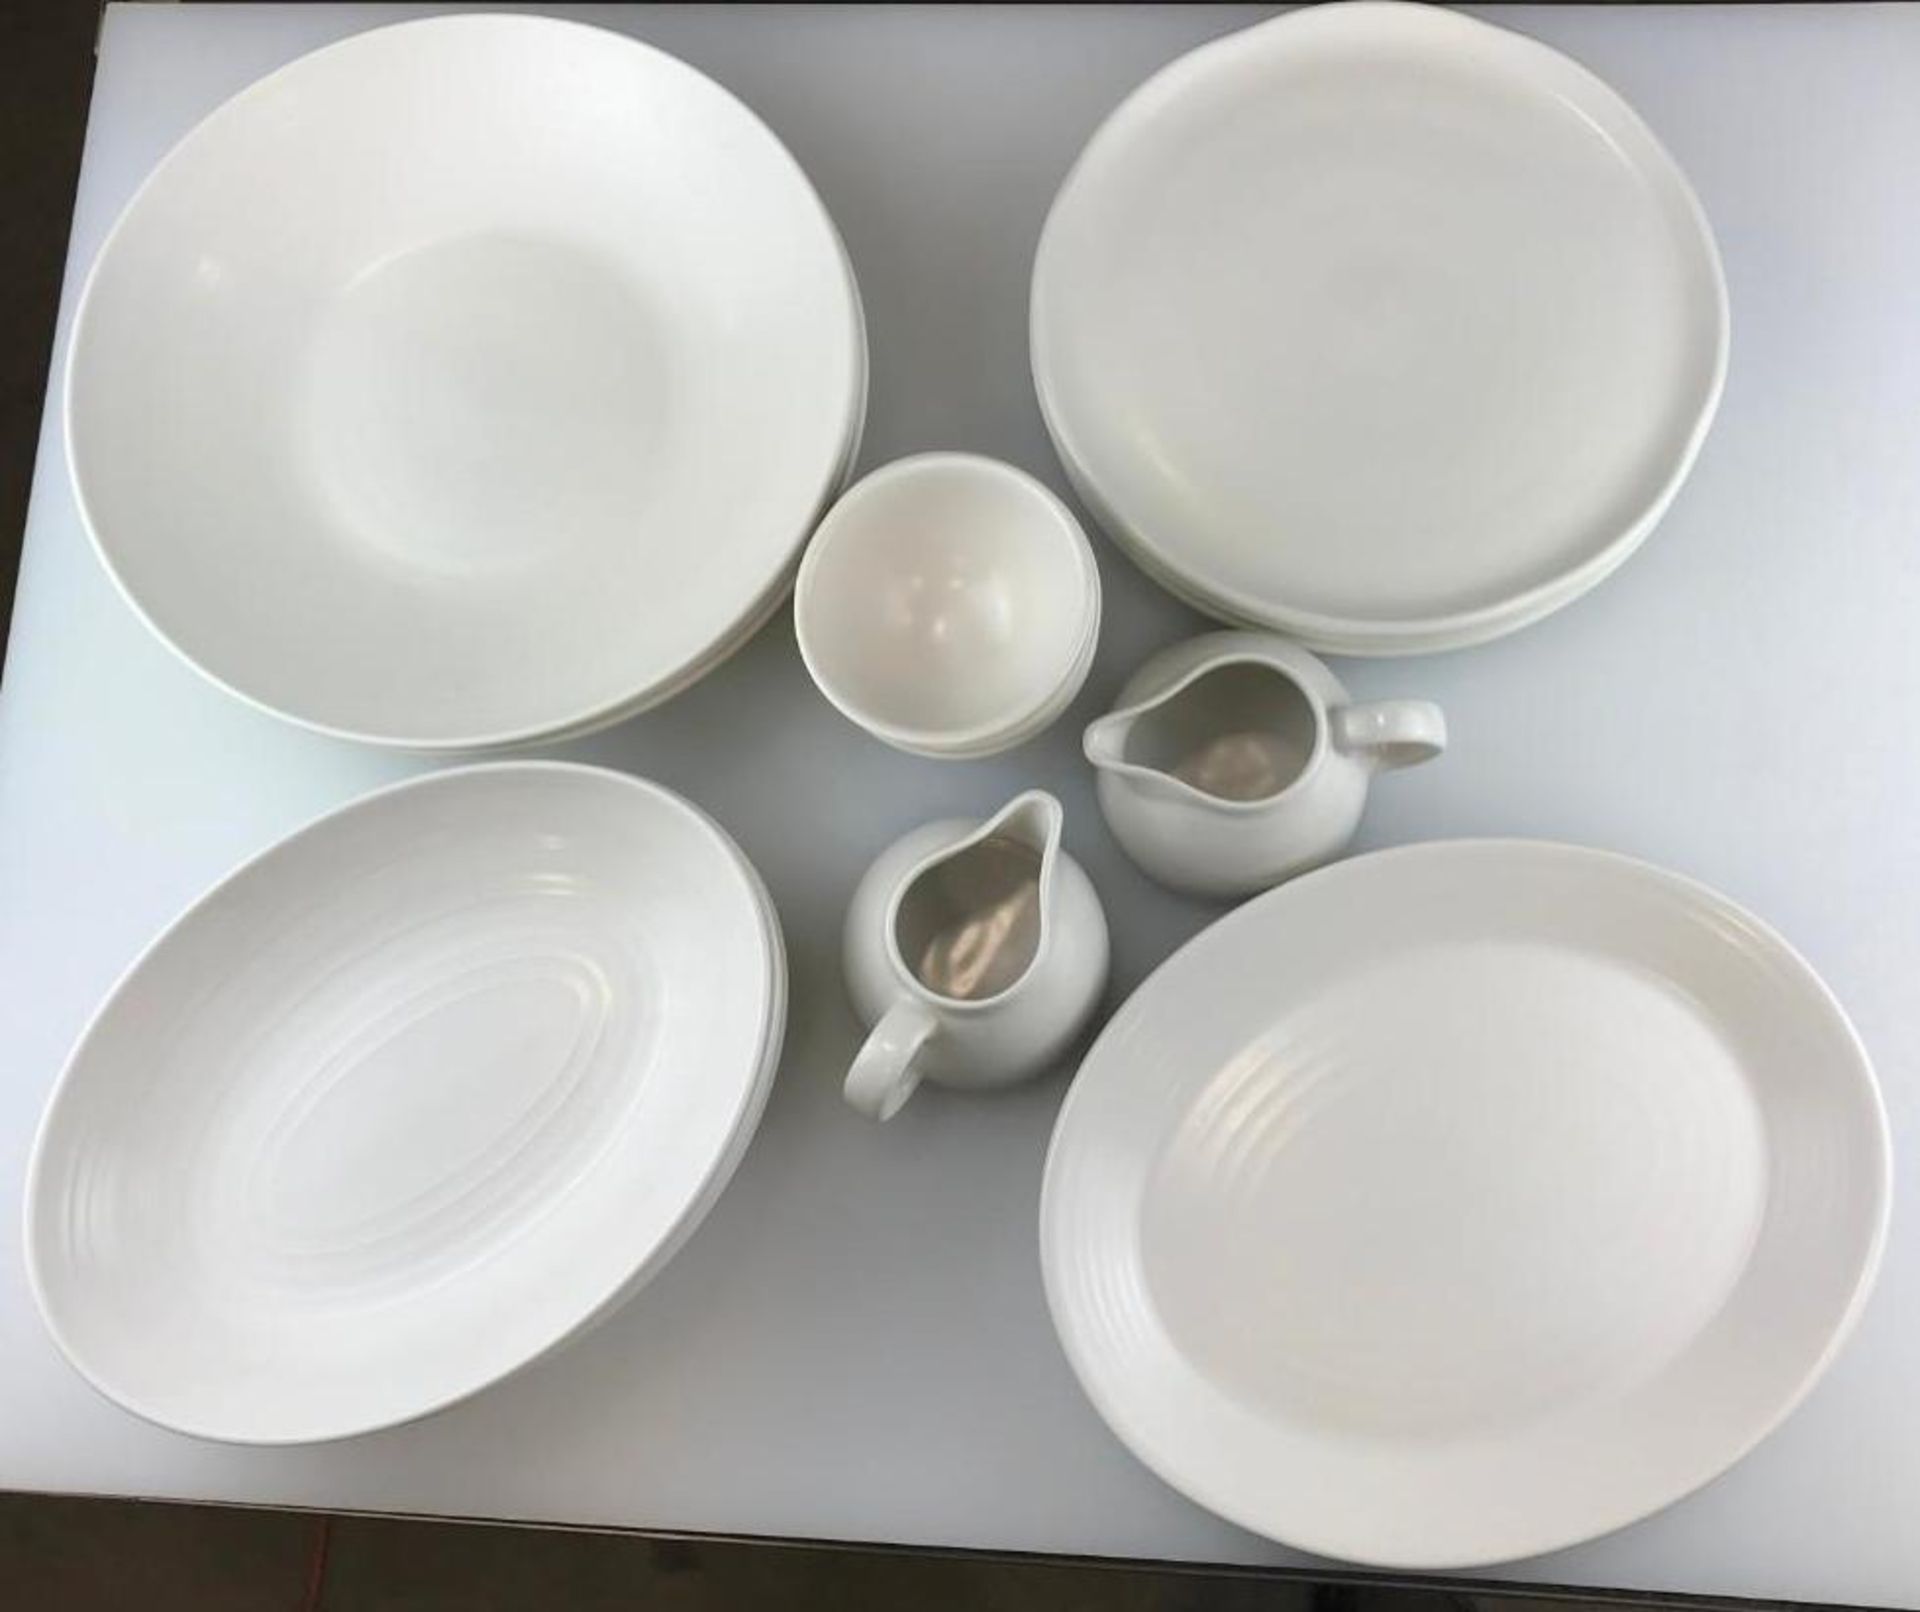 22 PIECE DUDSON EVO PEARL DINNERWARE SET, MADE IN ENGLAND - Image 2 of 8